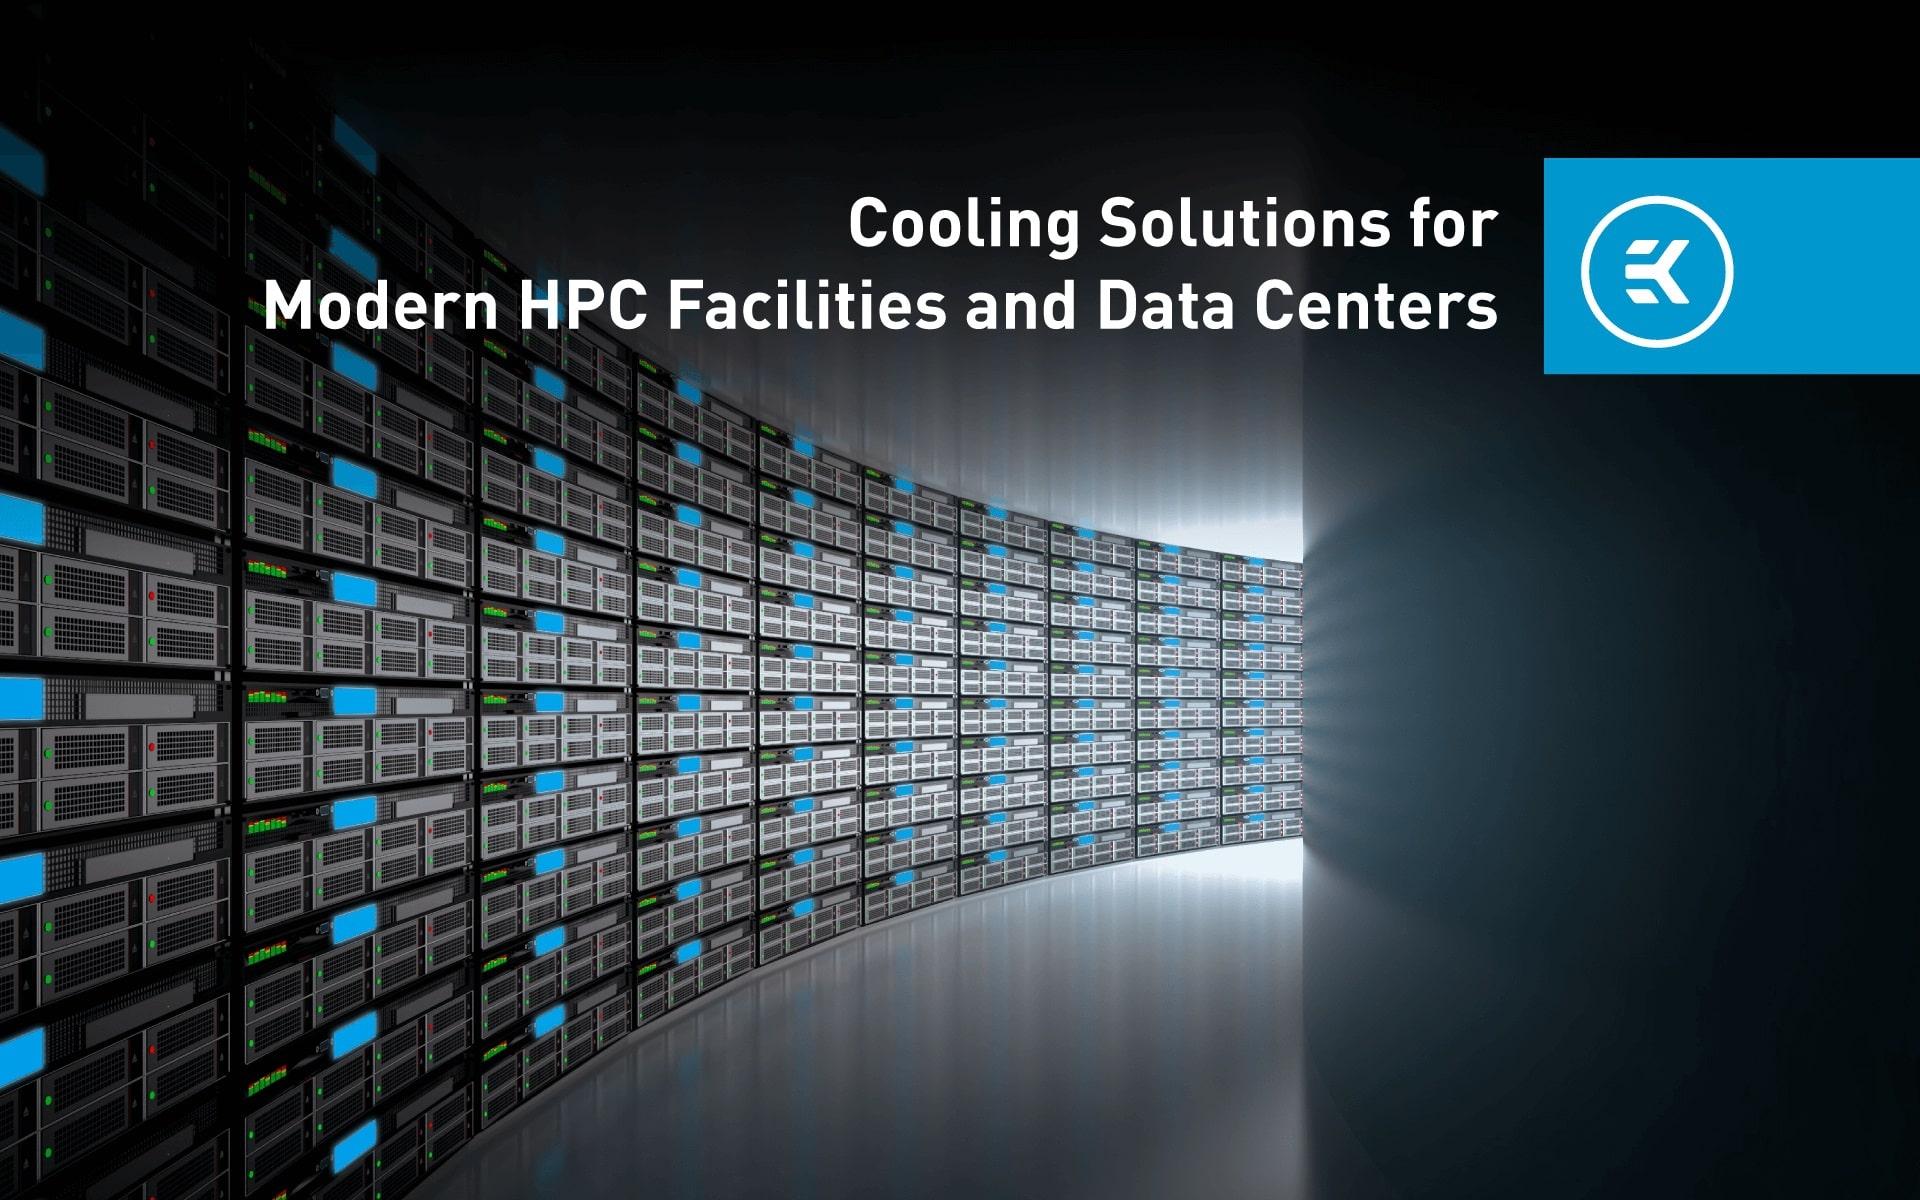 Cooling Solutions for Modern HPC Facilities and Data Centers